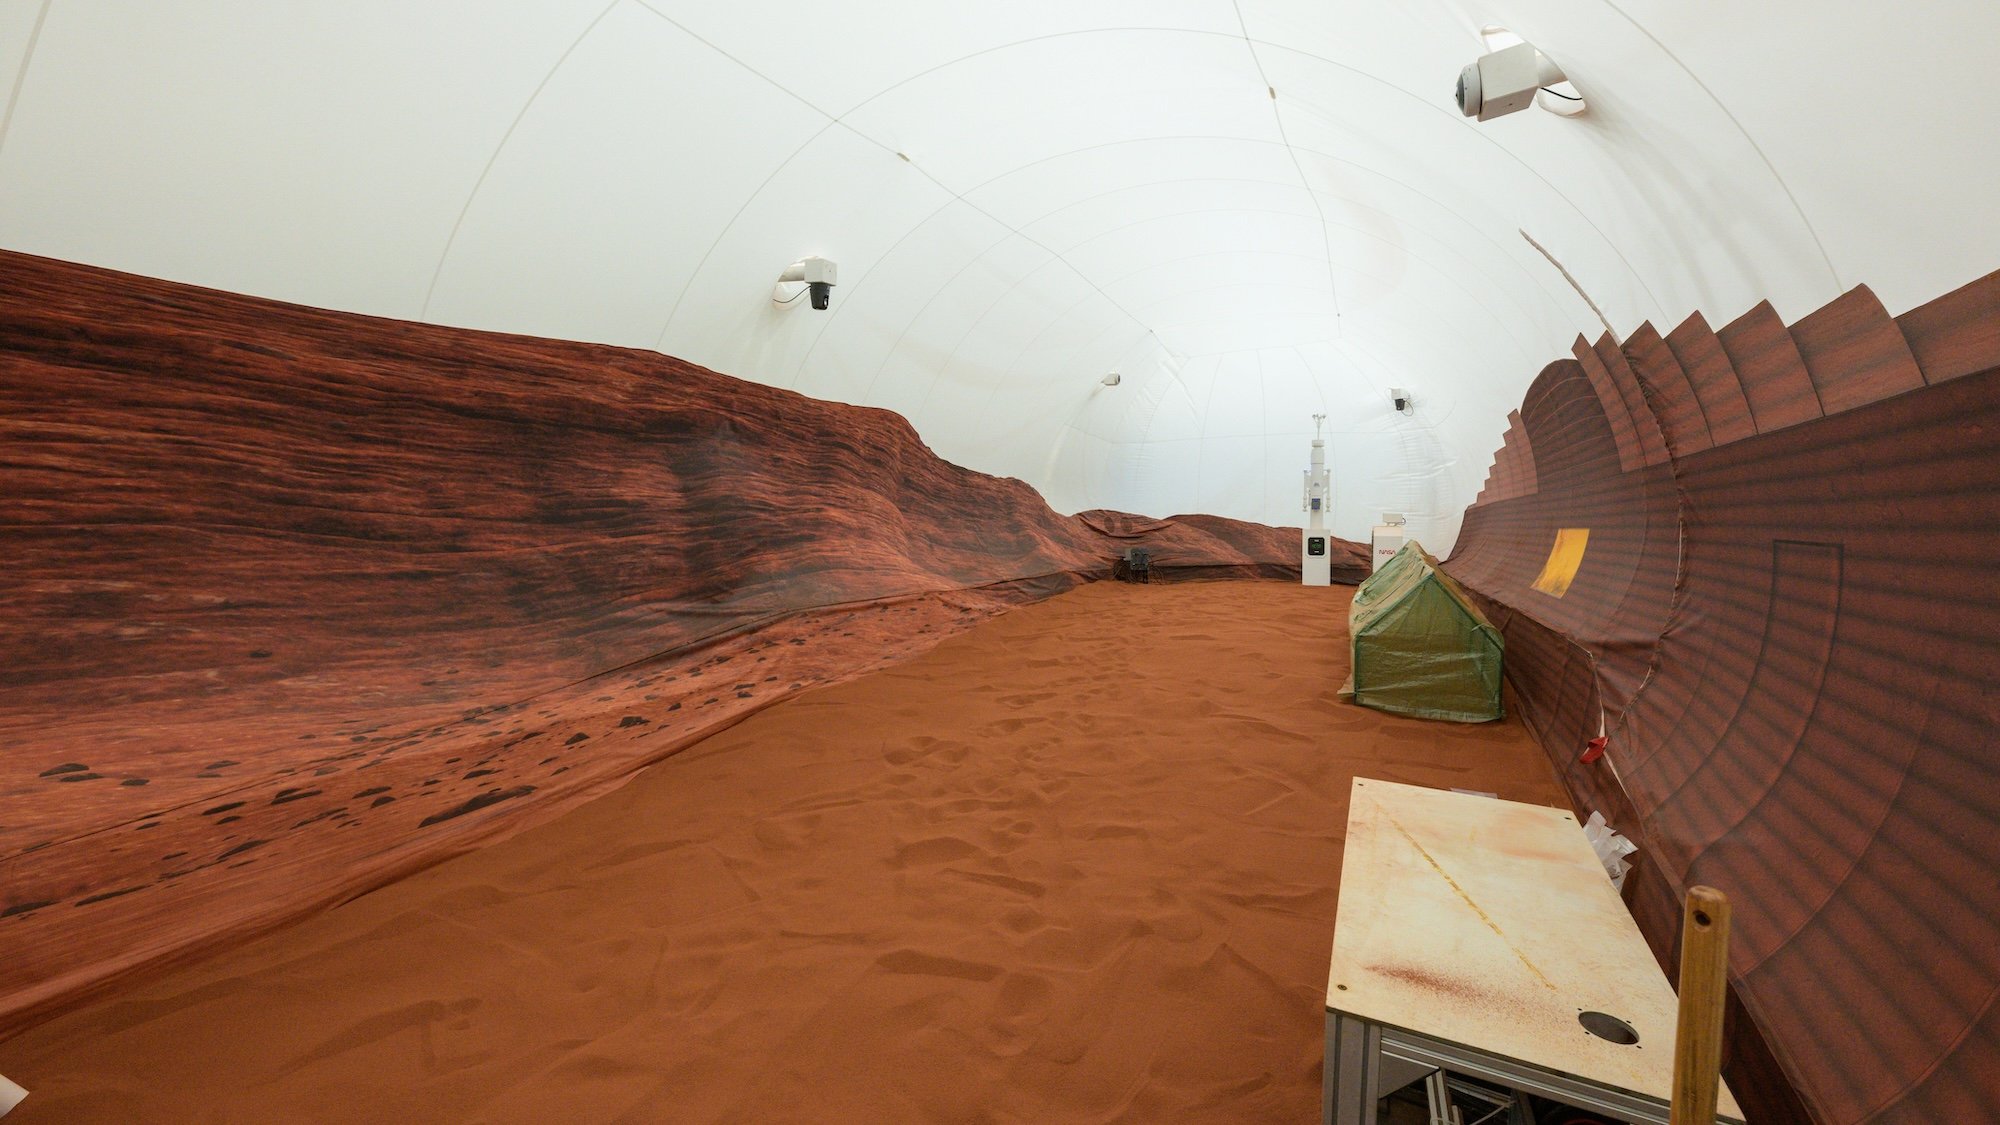 What it was like to spend a year in NASA’s Mars base simulation